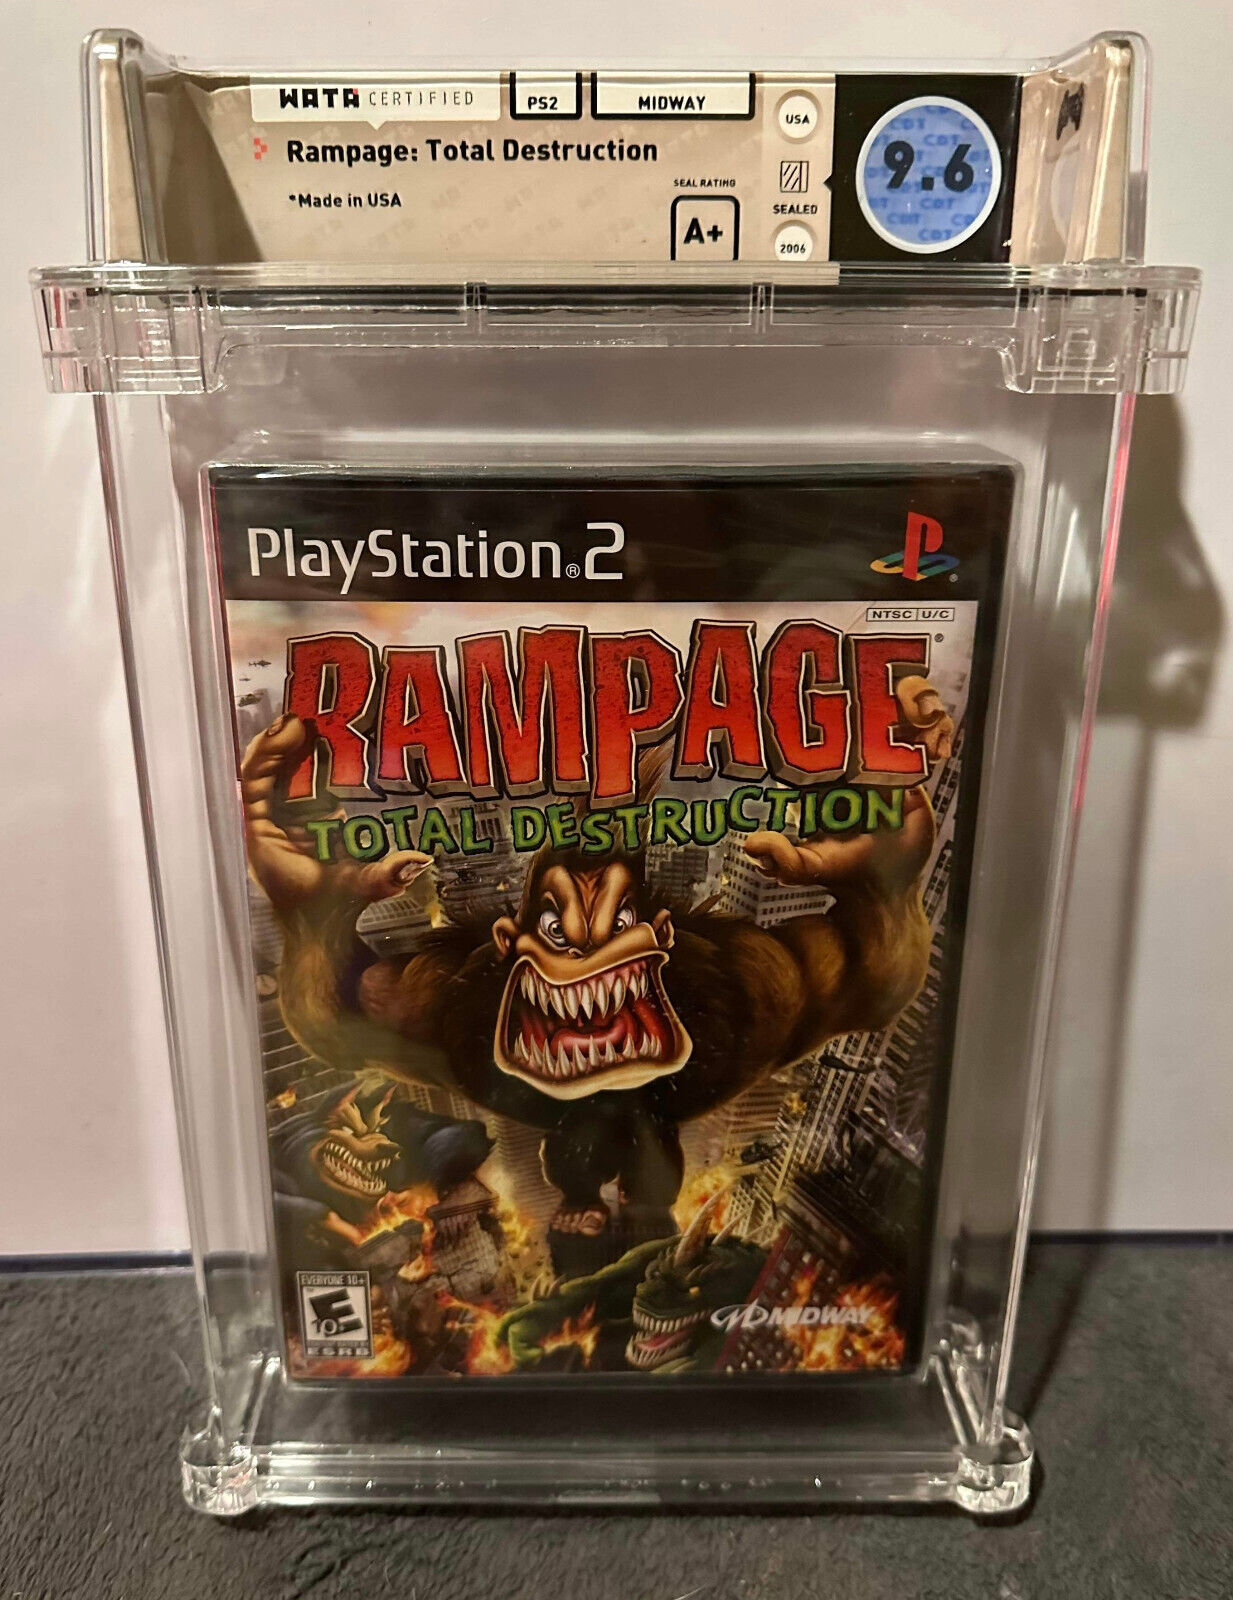 Rampage - Playstation 2 WATA 9.6 Certified A+ PS2